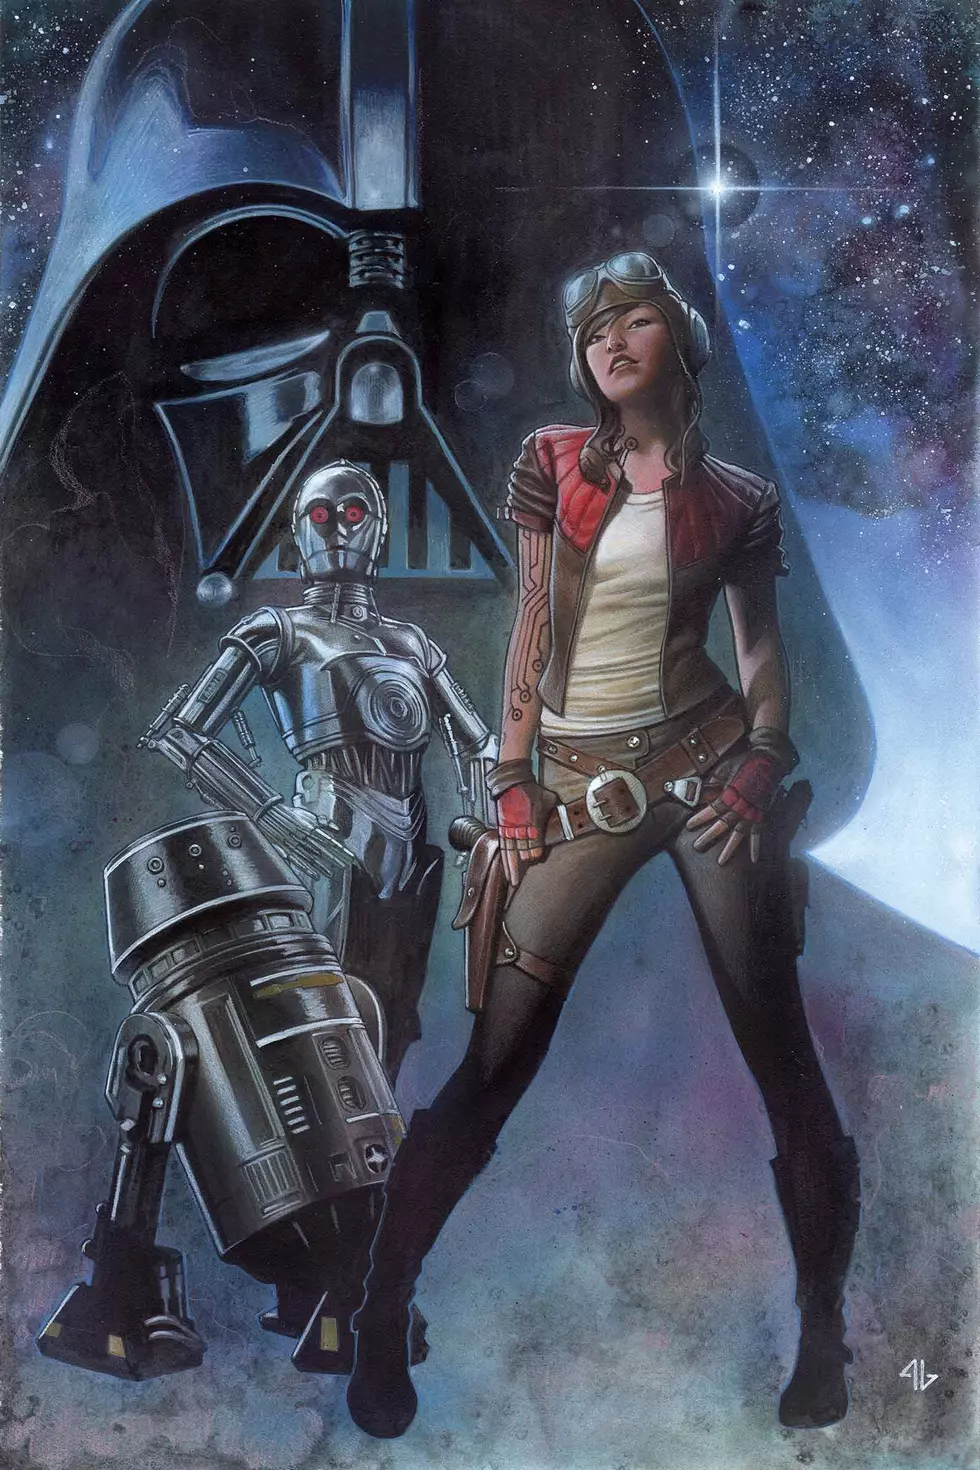 Crash Course: Get To Know Doctor Aphra Before Her Ongoing Series In December